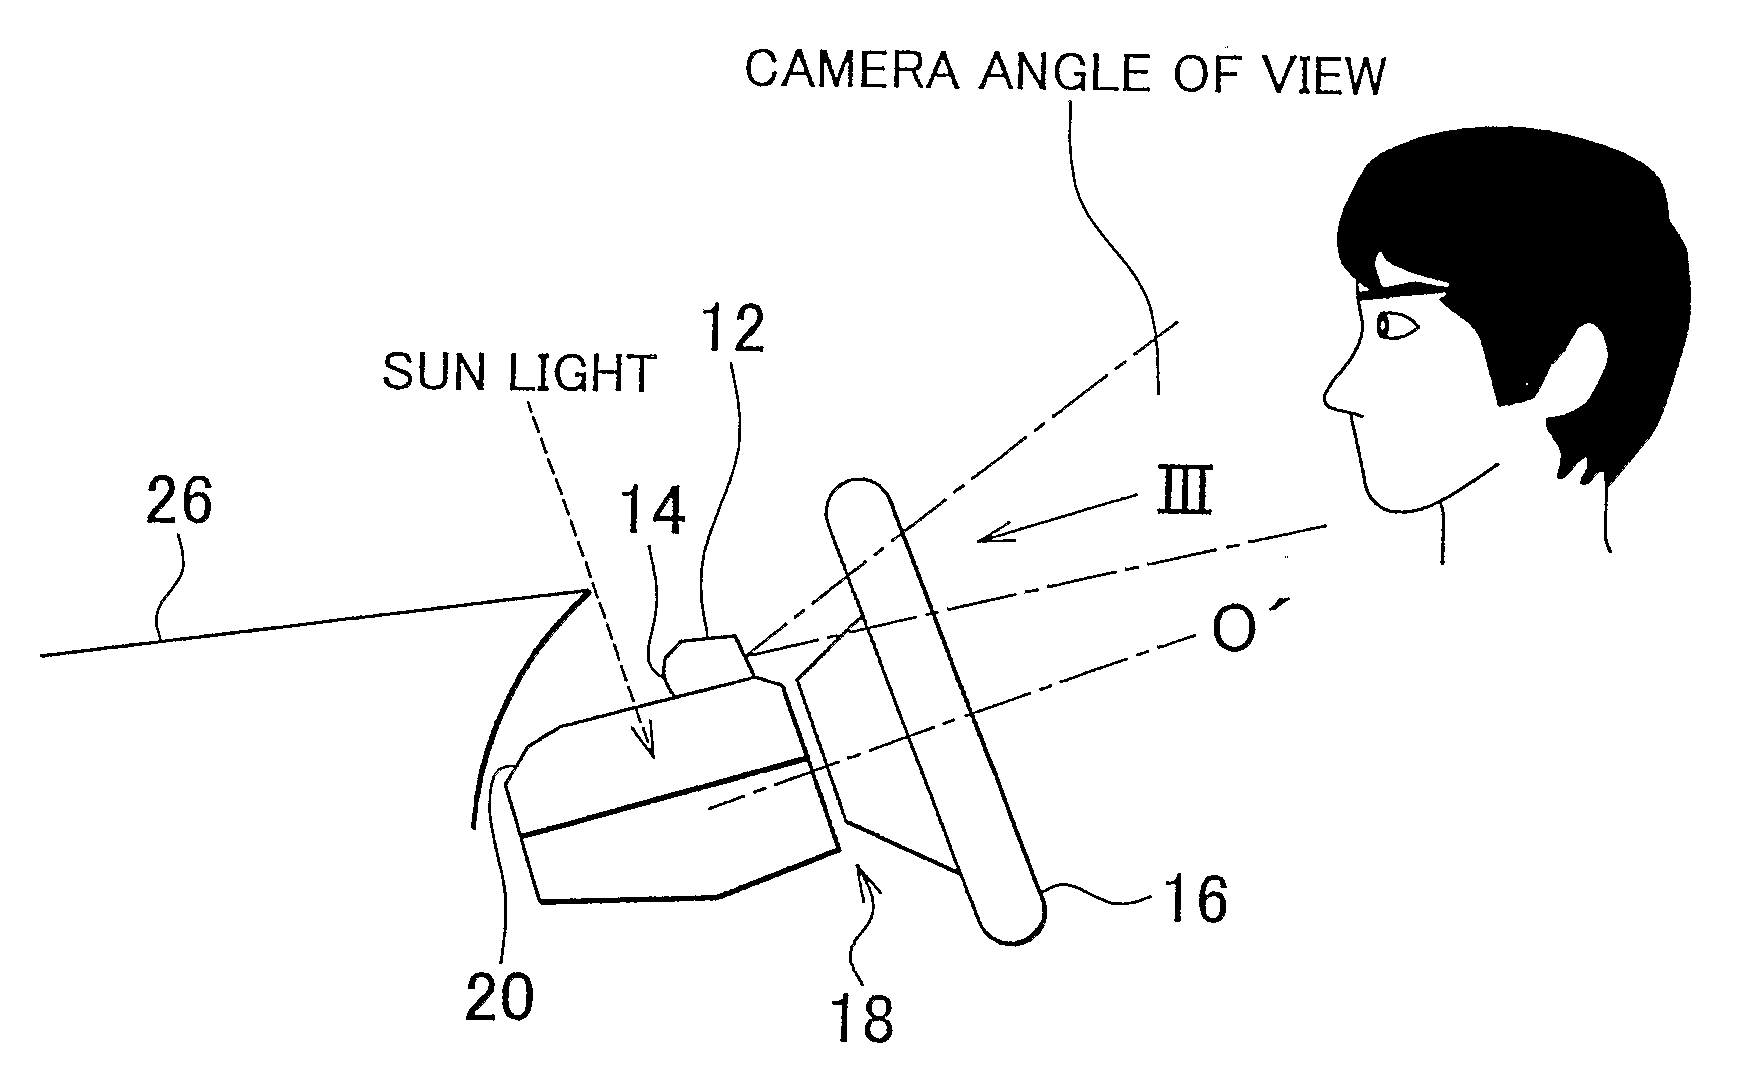 Mounting construction for a facial image photographic camera